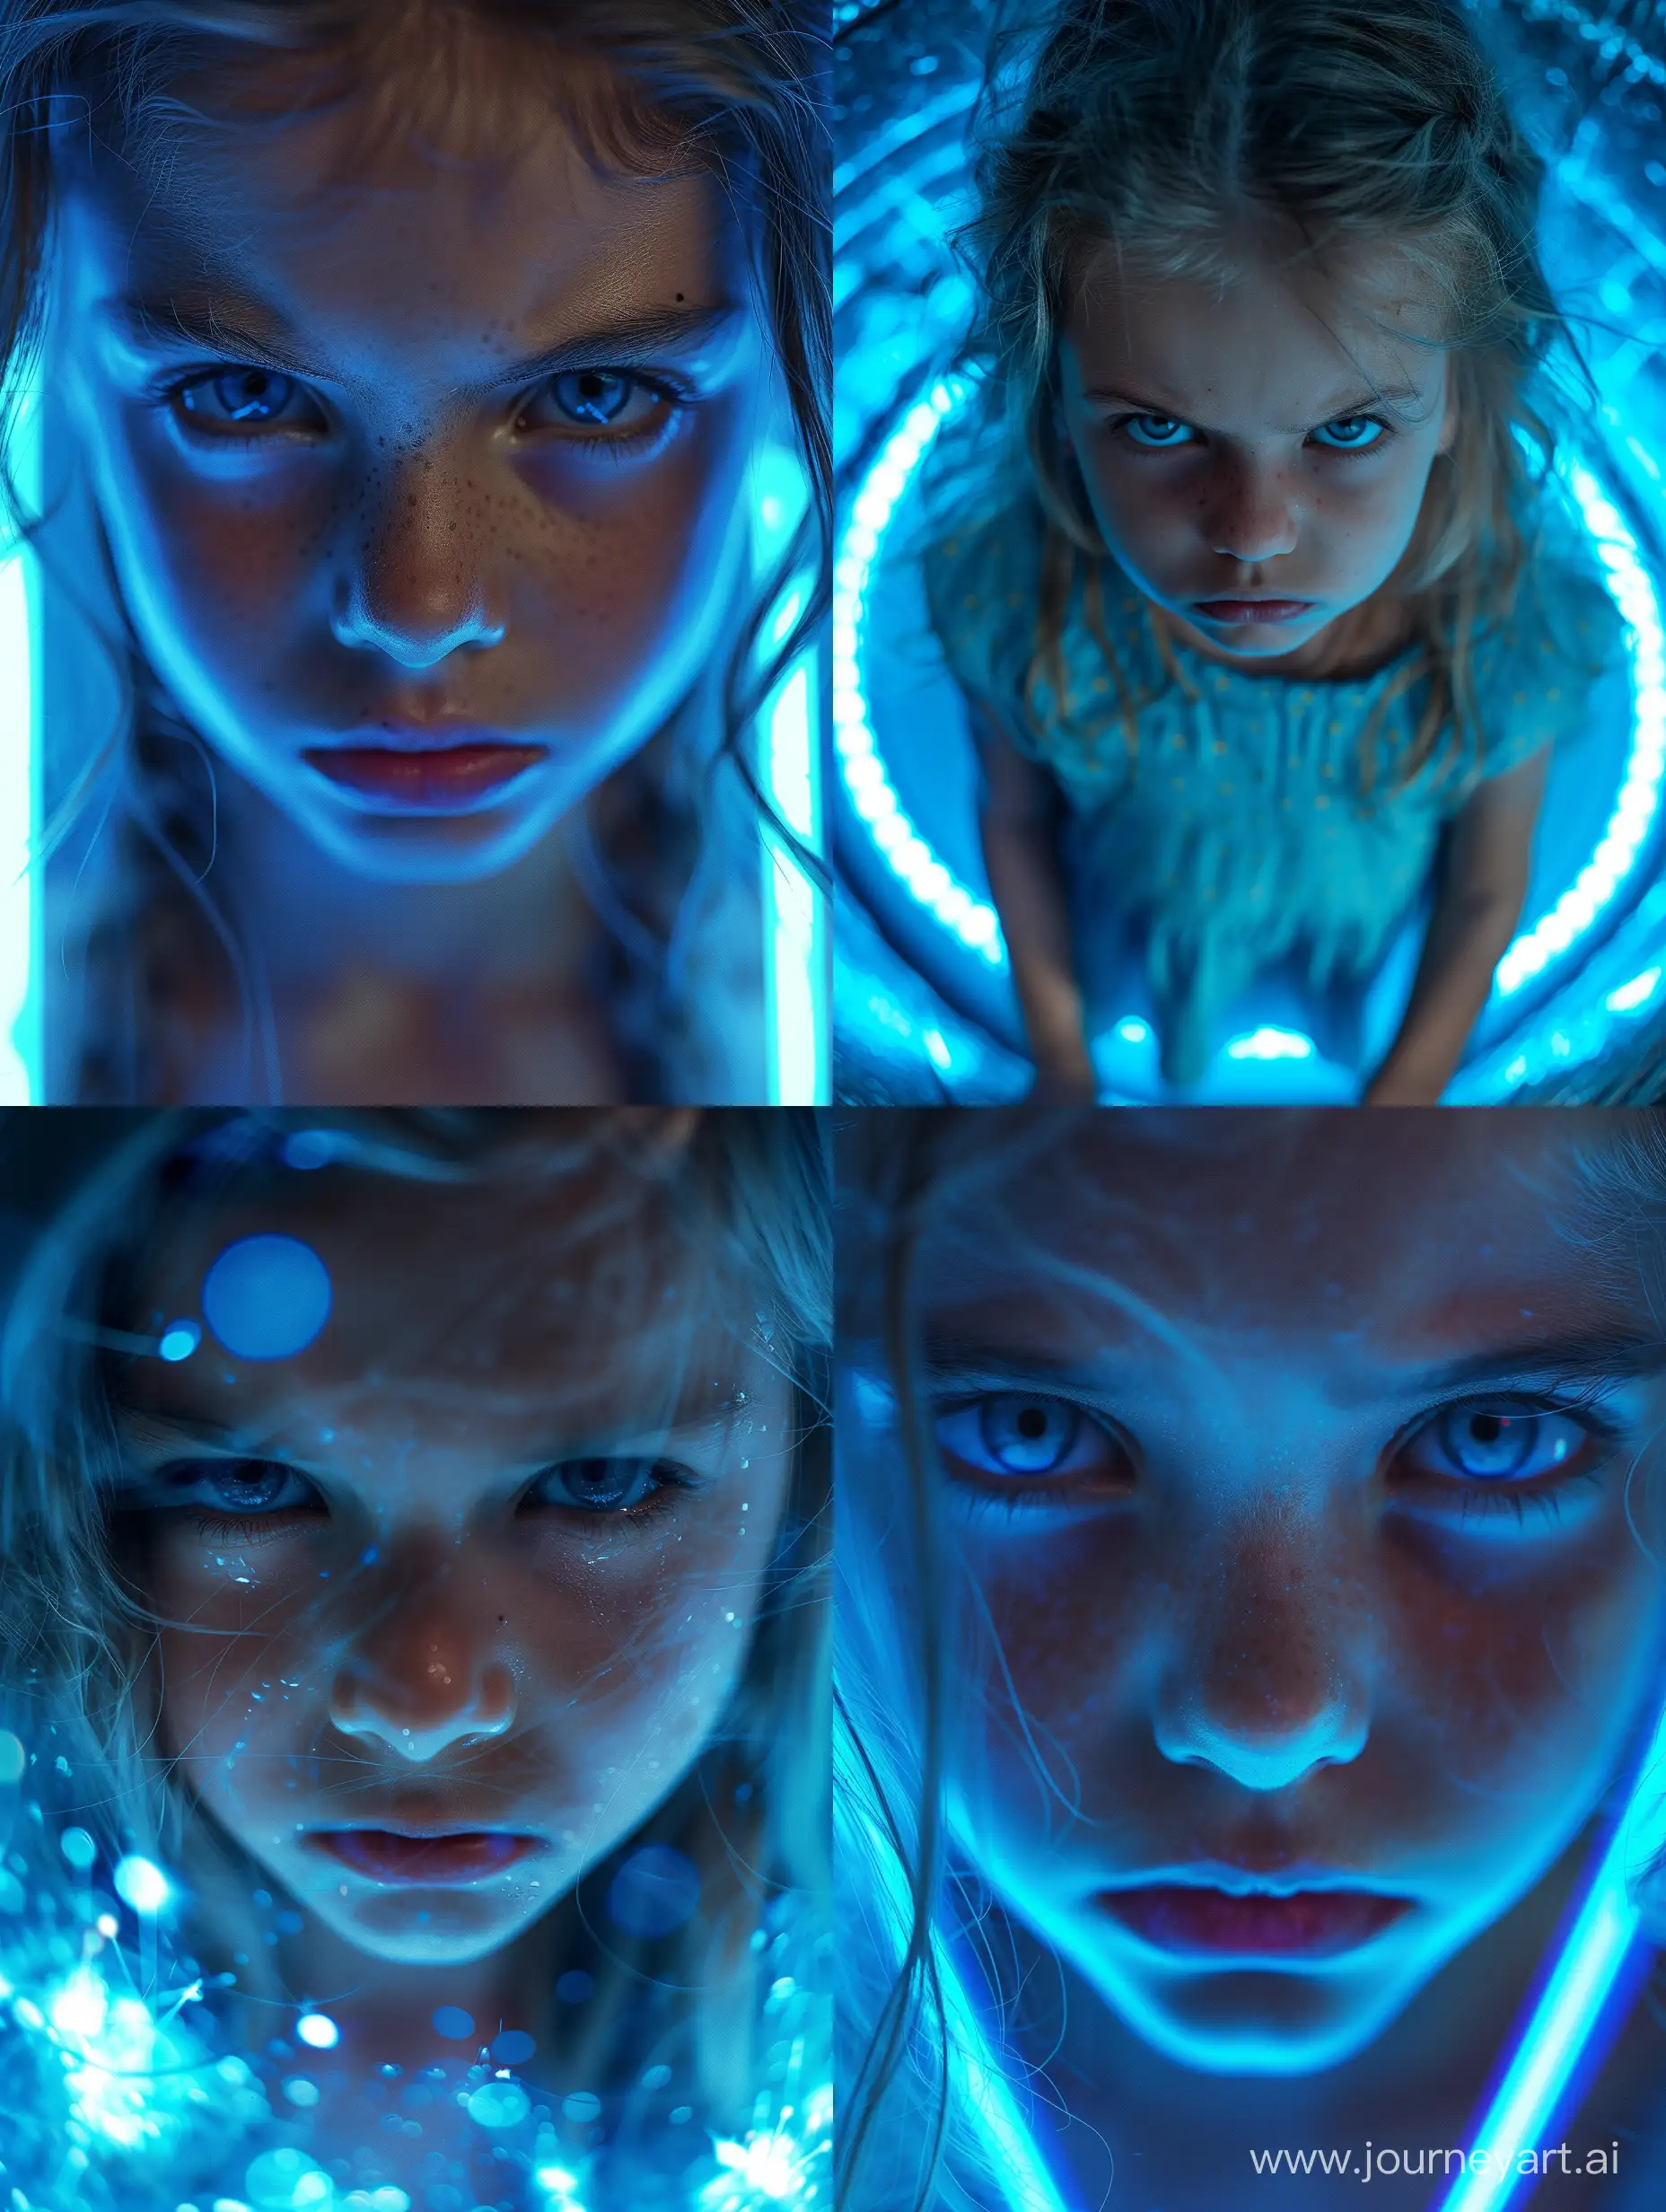 Dynamic-Fashion-Shoot-Angry-Little-Girl-with-Dramatic-Blue-Light-Neon-Effect